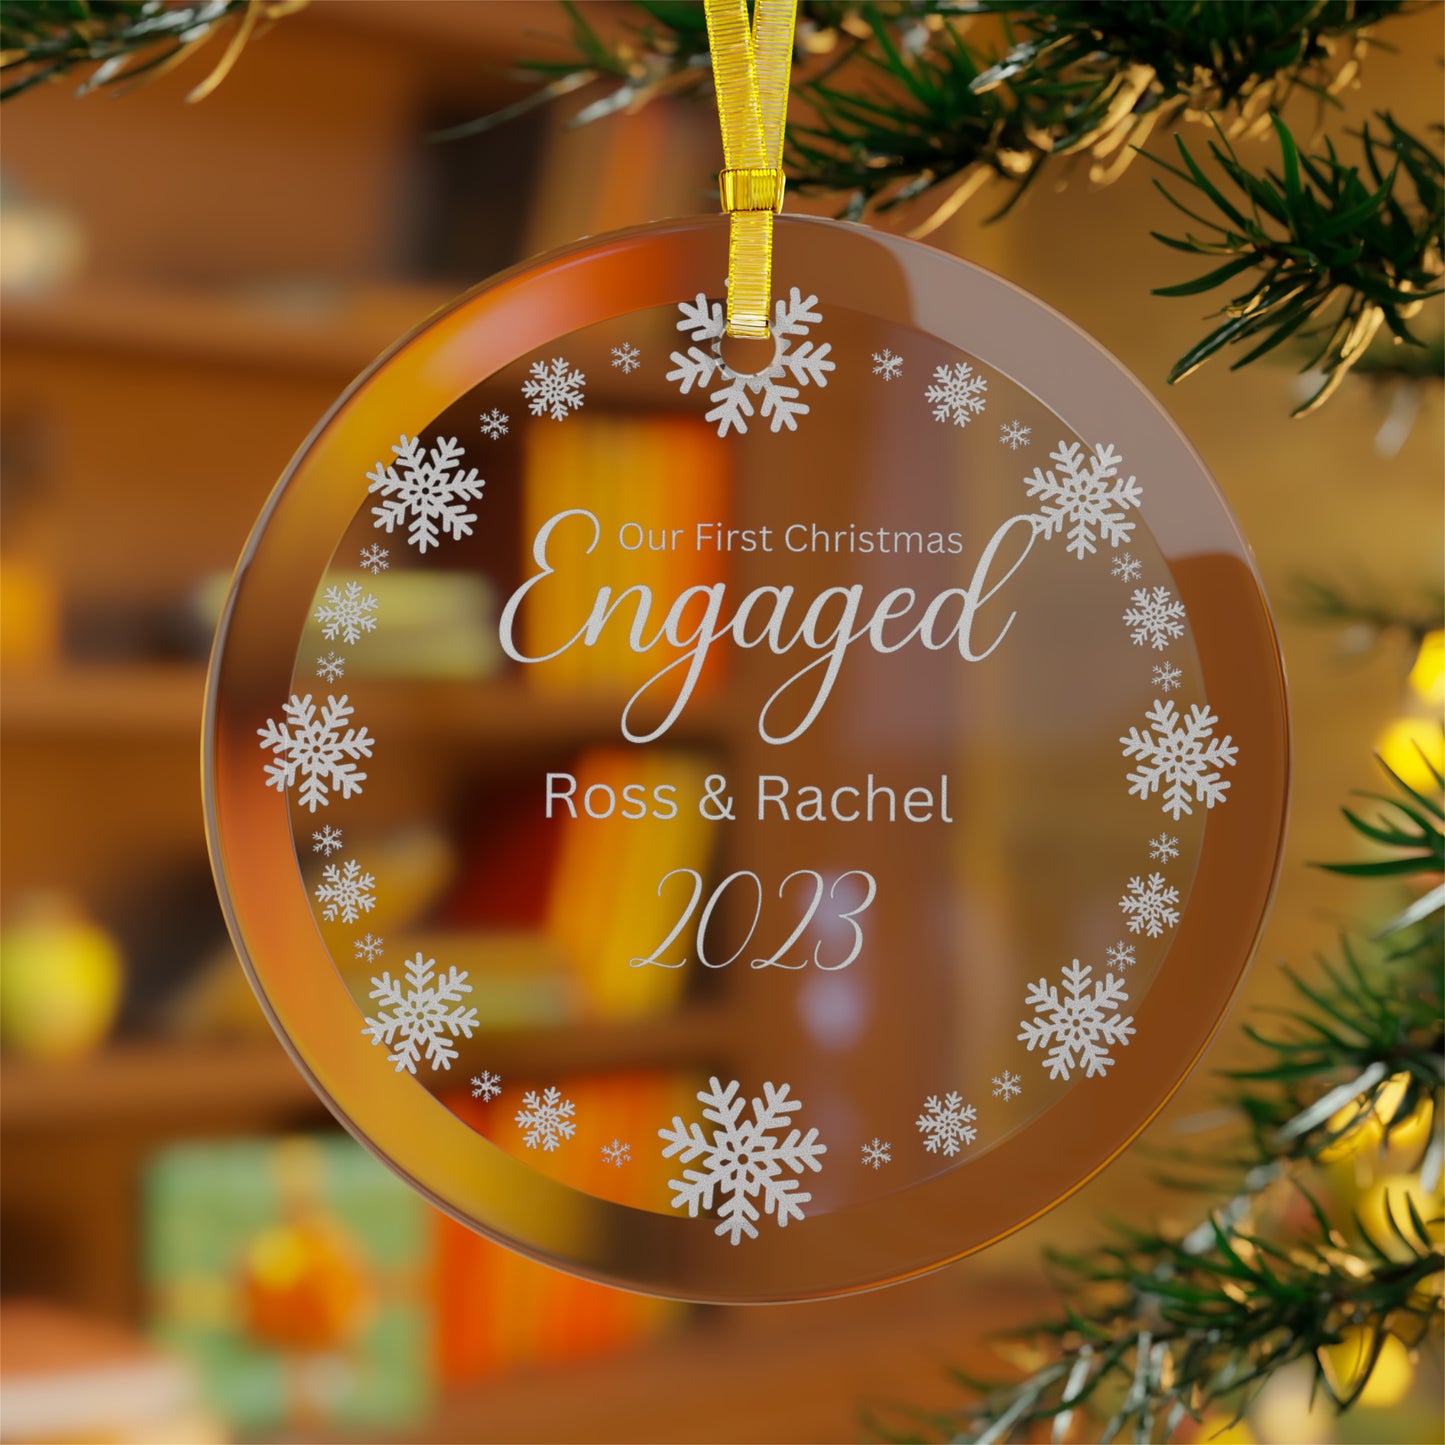 Our First Christmas Engaged - Glass Ornament To Commemorate Your Engagement, Engagement Ornament Gift White Snowflakes